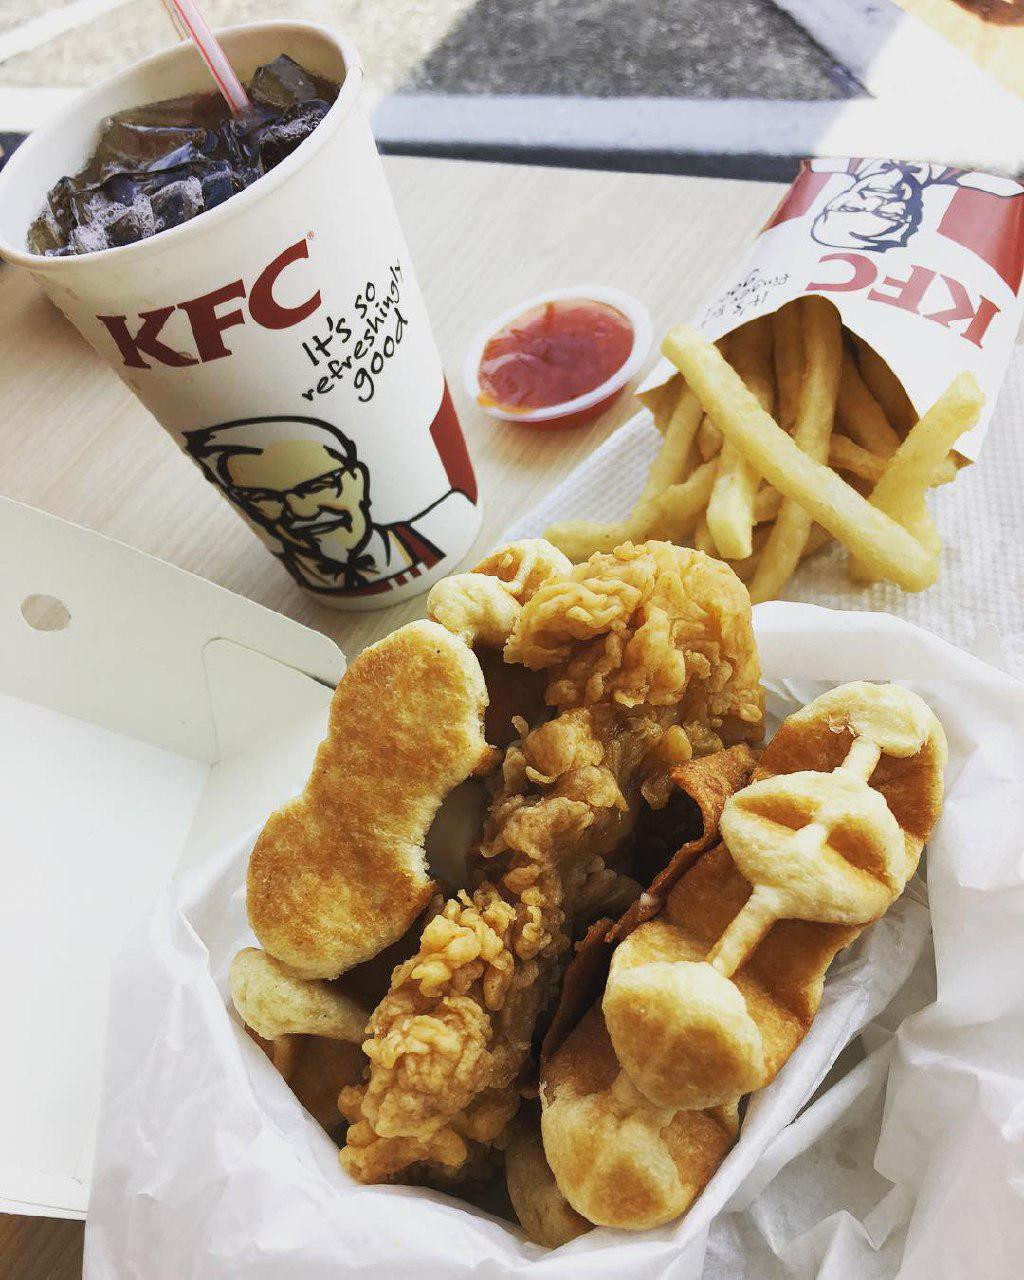 Kfc Chicken And Waffles Review
 KFC Launches Two Waffle Dishes Including A Zinger Waffle